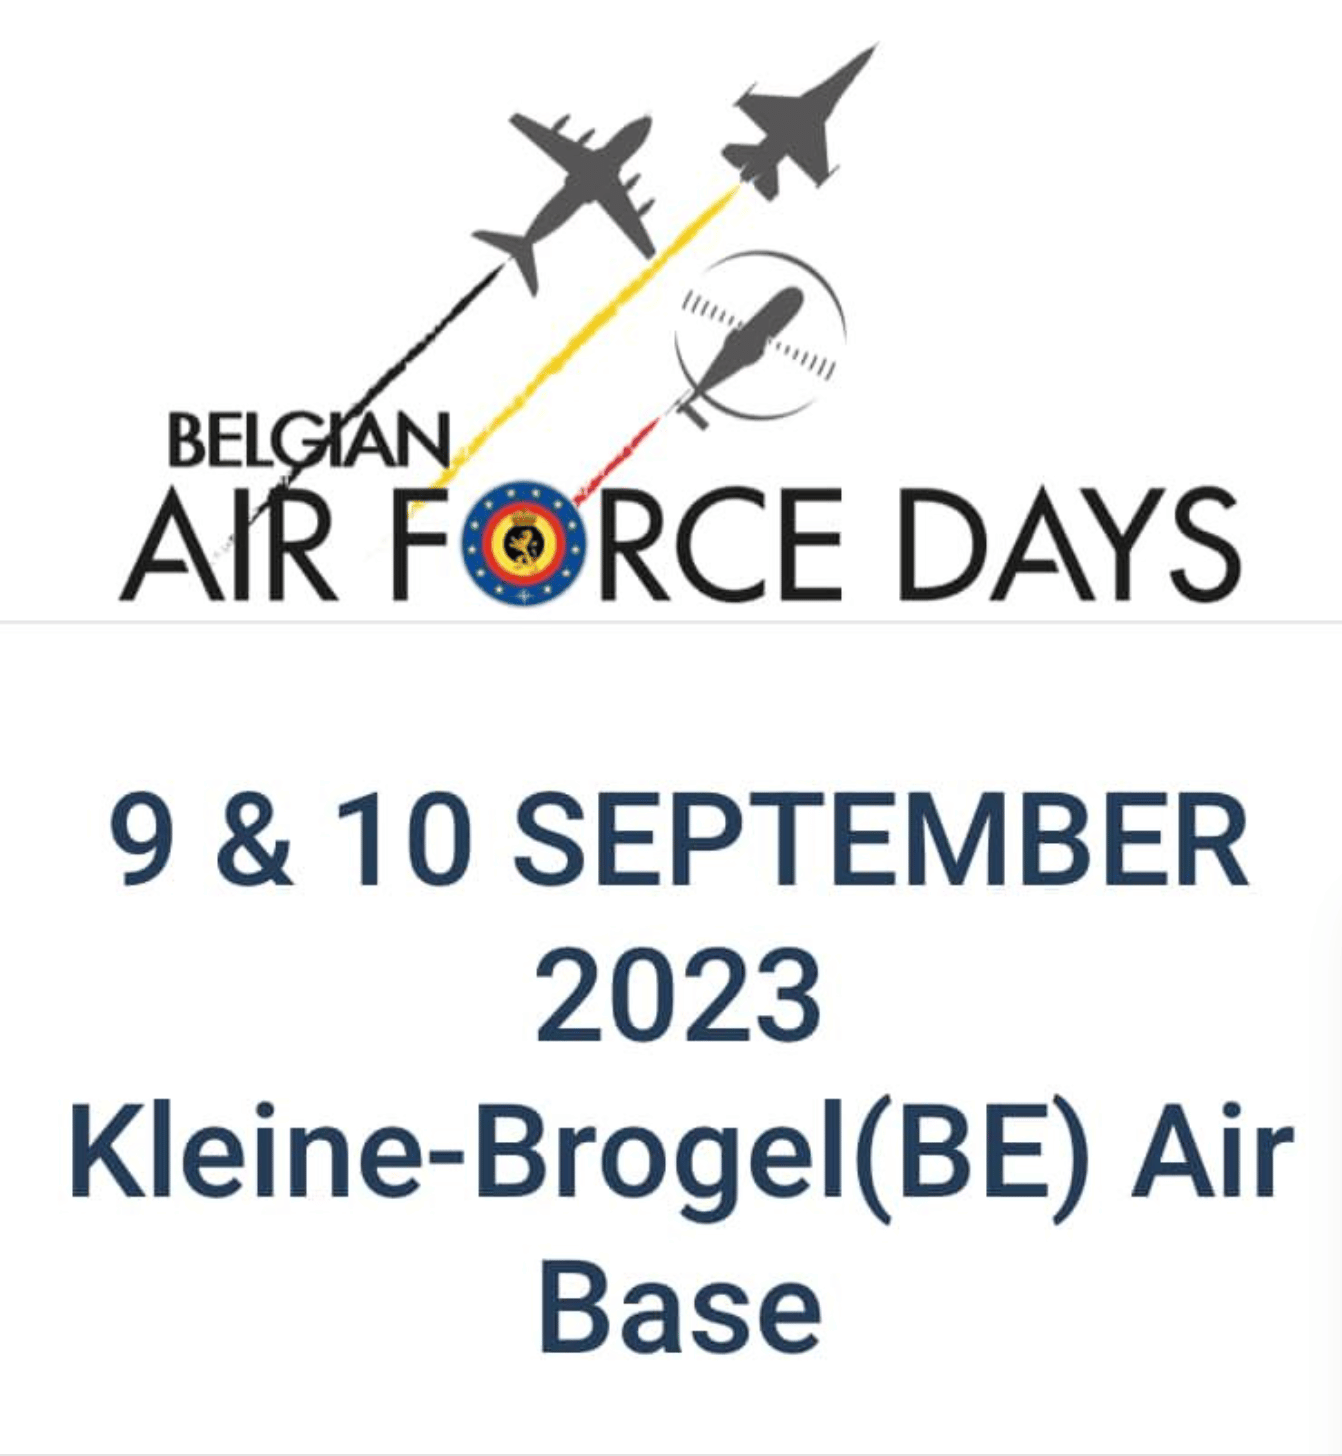 Belgian Air force day 2023